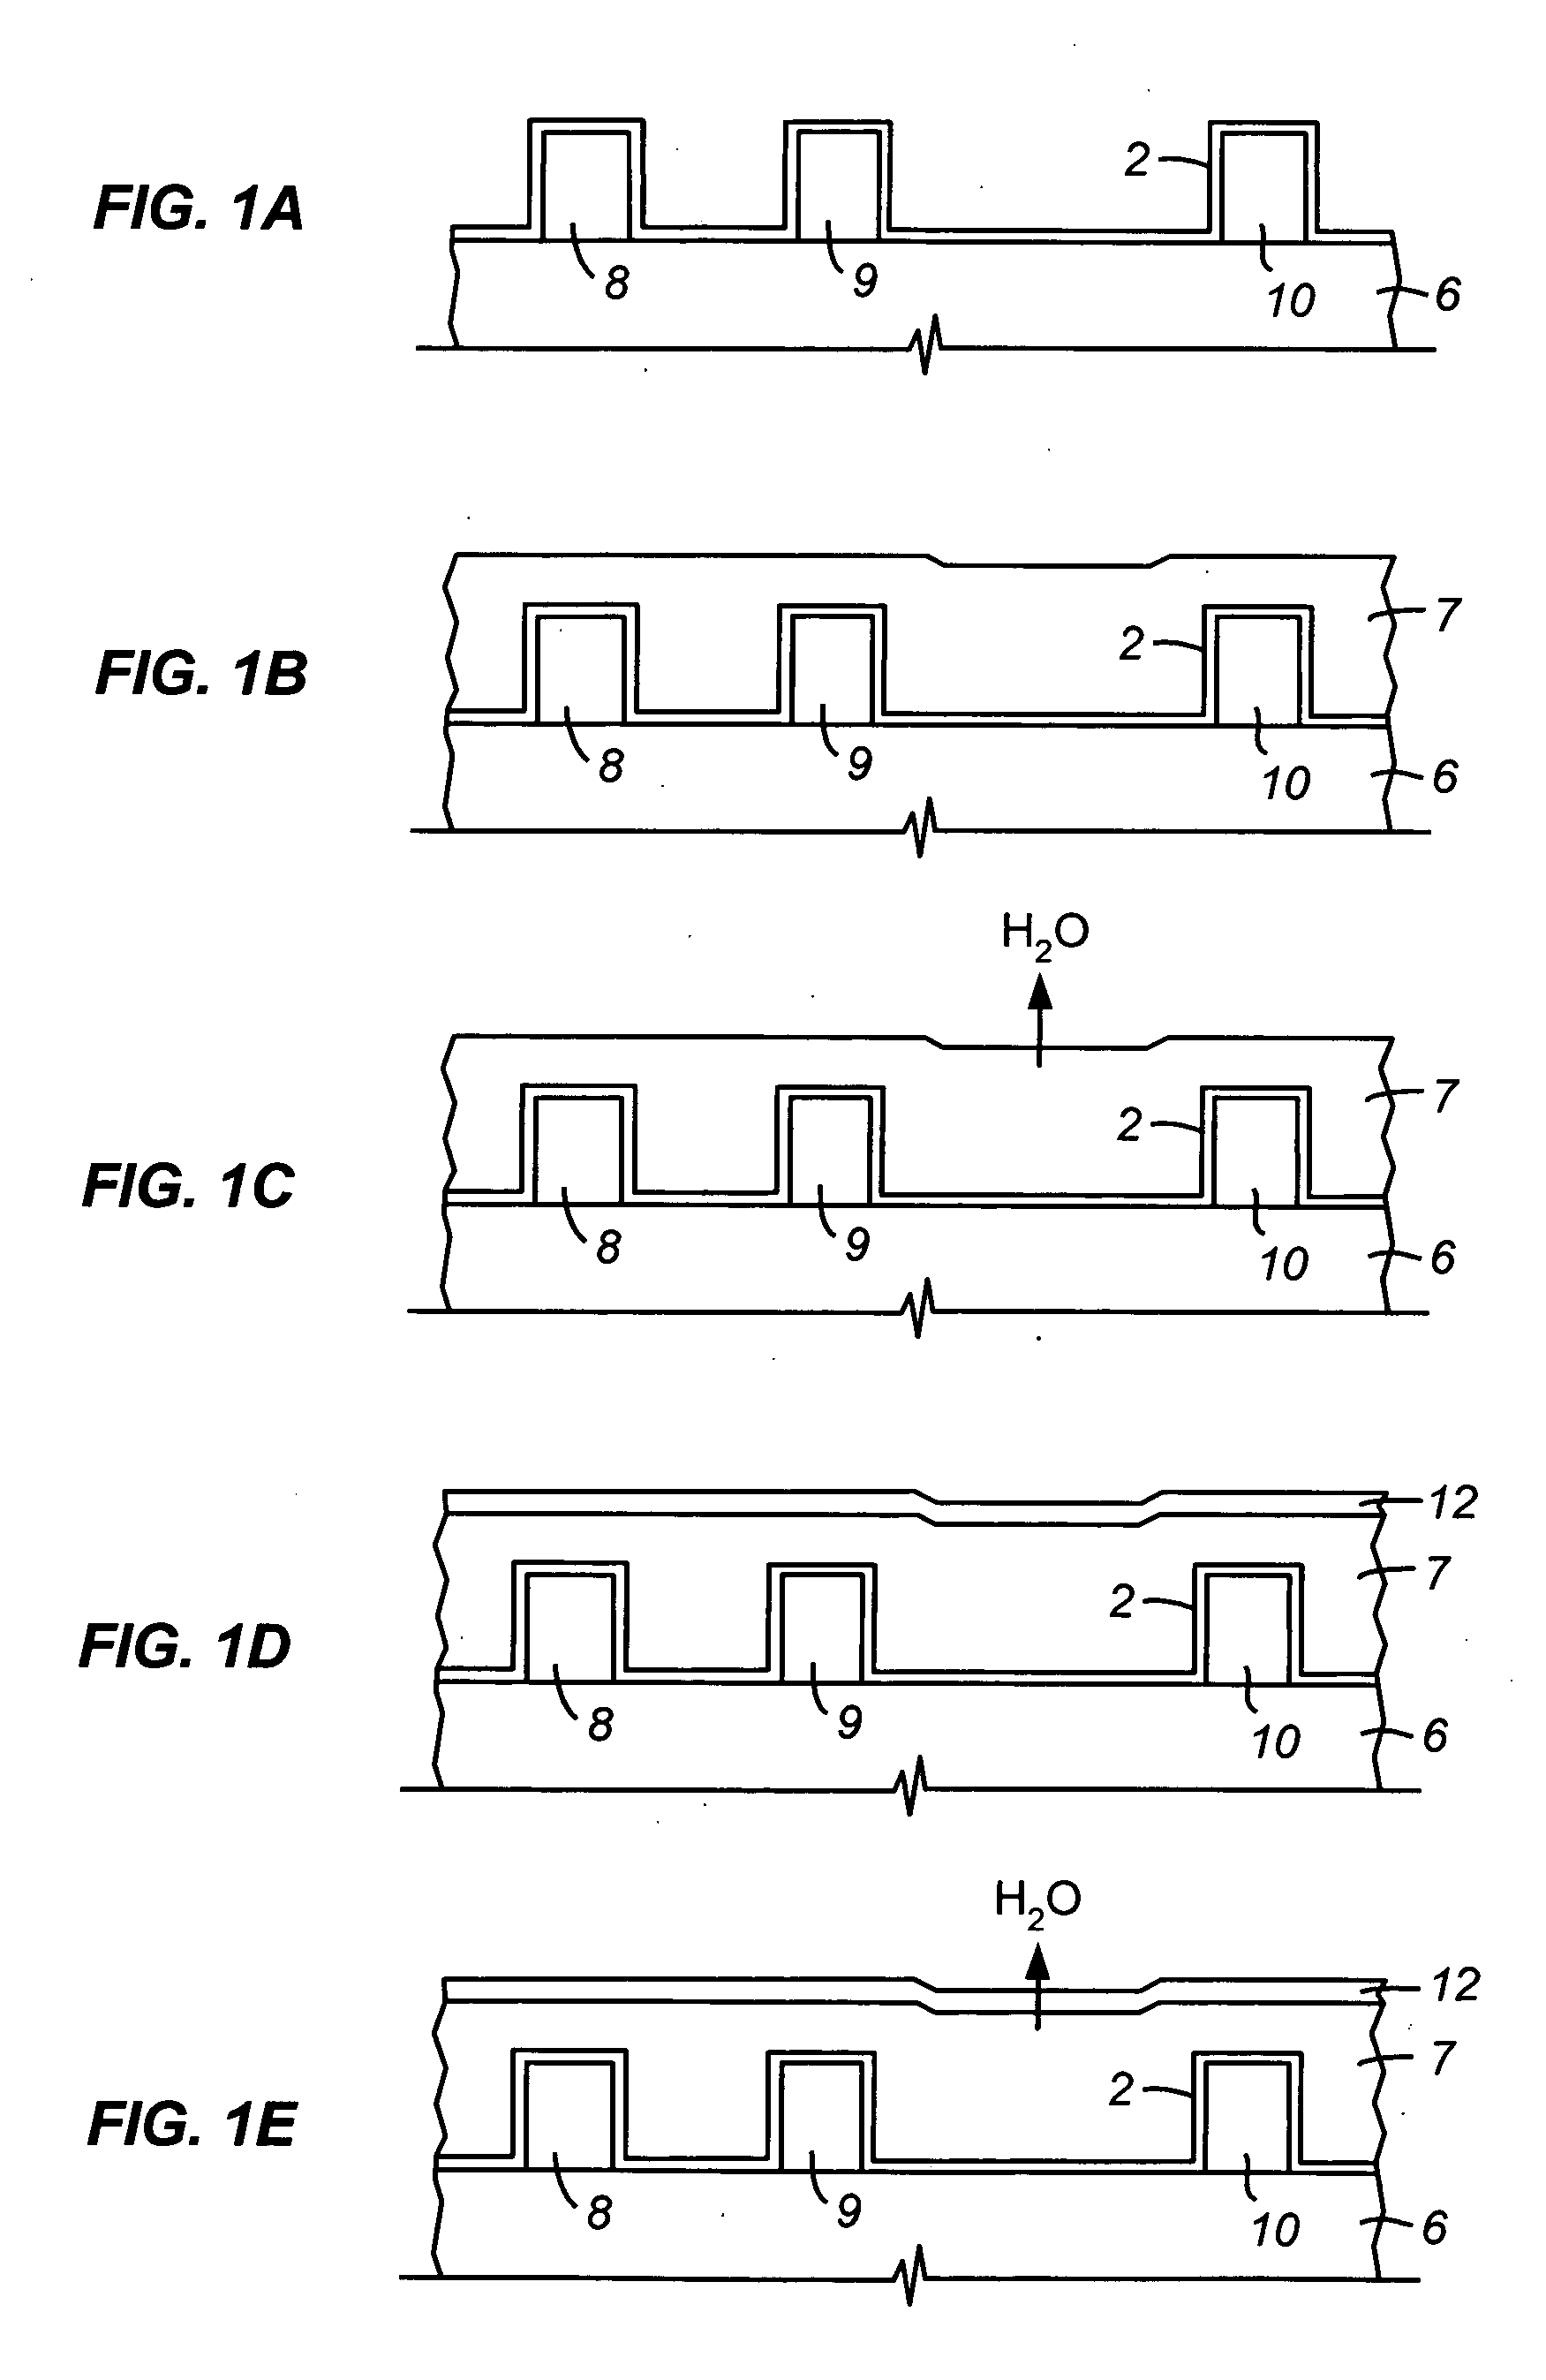 Formation of low K material utilizing process having readily cleaned by-products